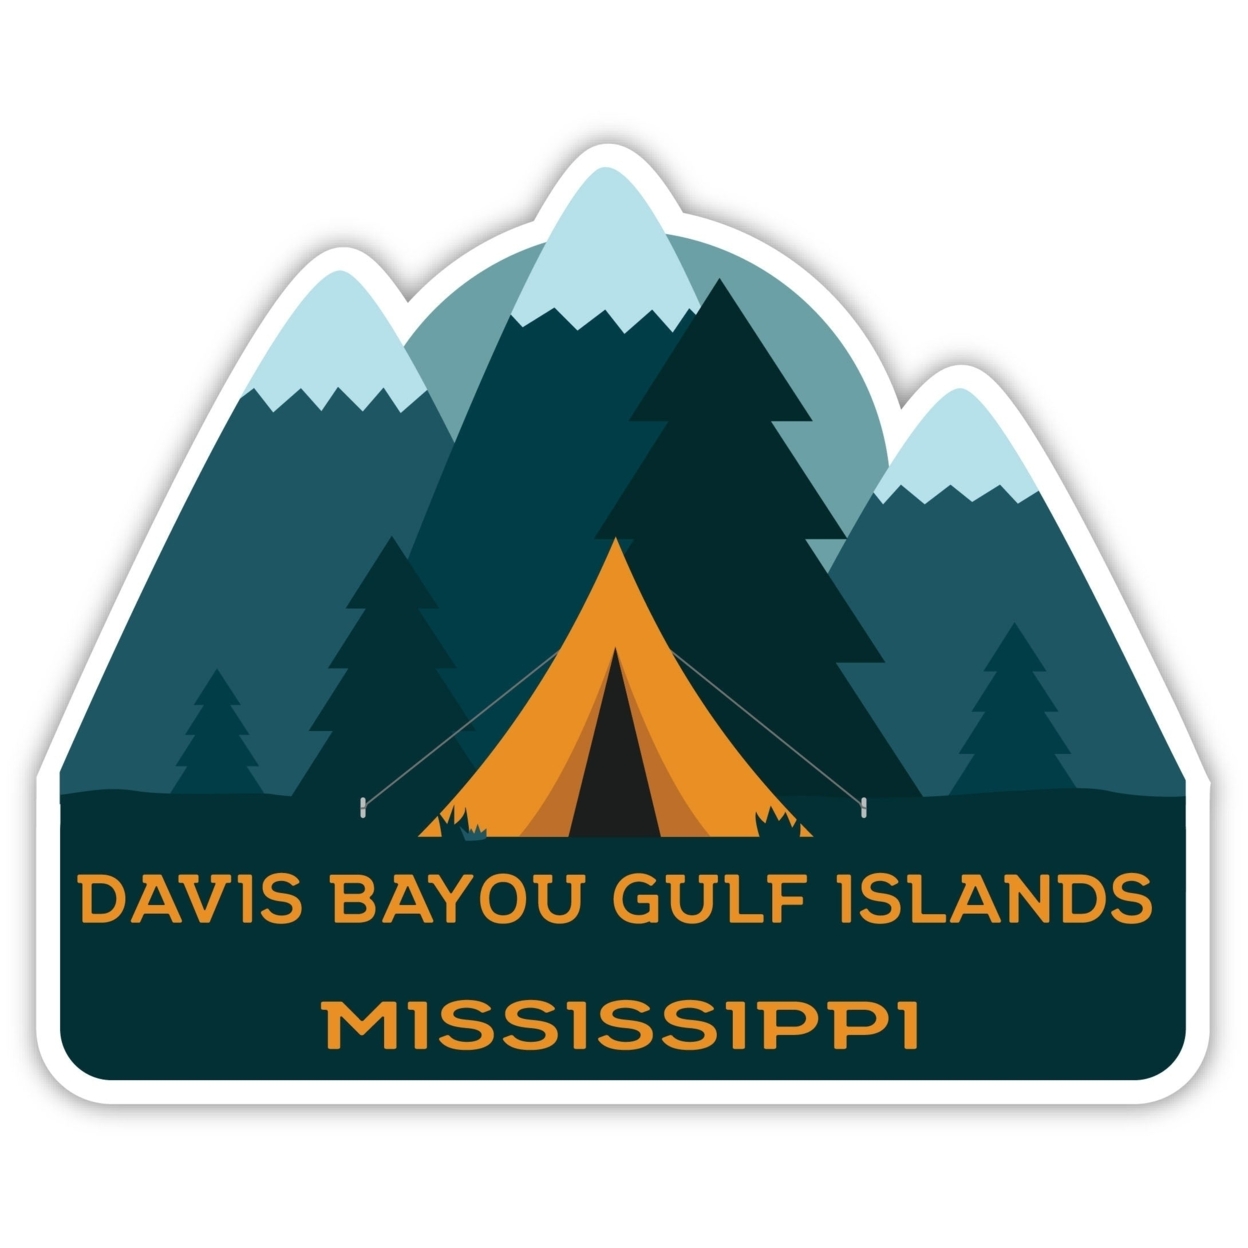 Davis Bayou Gulf Islands Mississippi Souvenir Decorative Stickers (Choose Theme And Size) - 4-Pack, 6-Inch, Tent